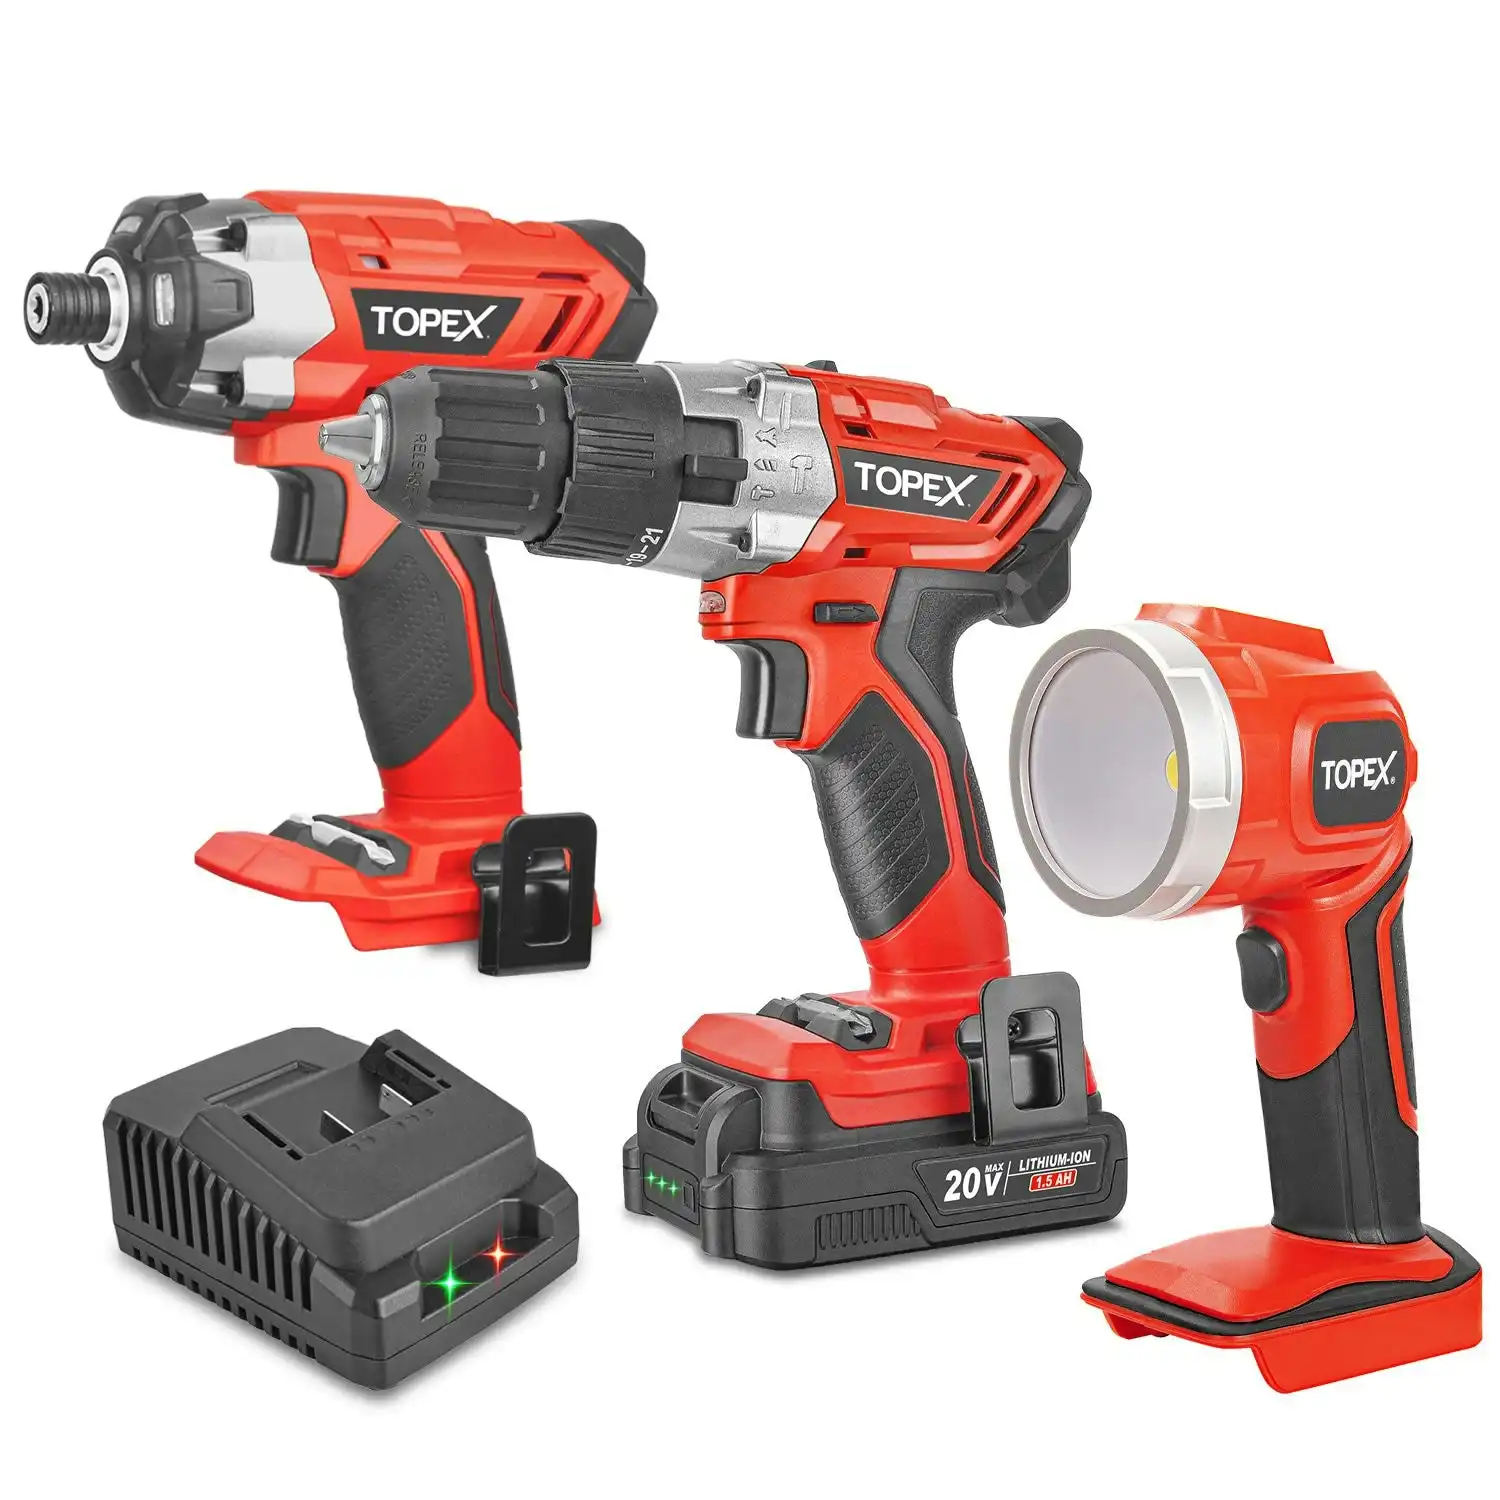 Topex 20 V Cordless Kit: Hammer Drill, Impact Driver, LED Light w/ Fast Charger